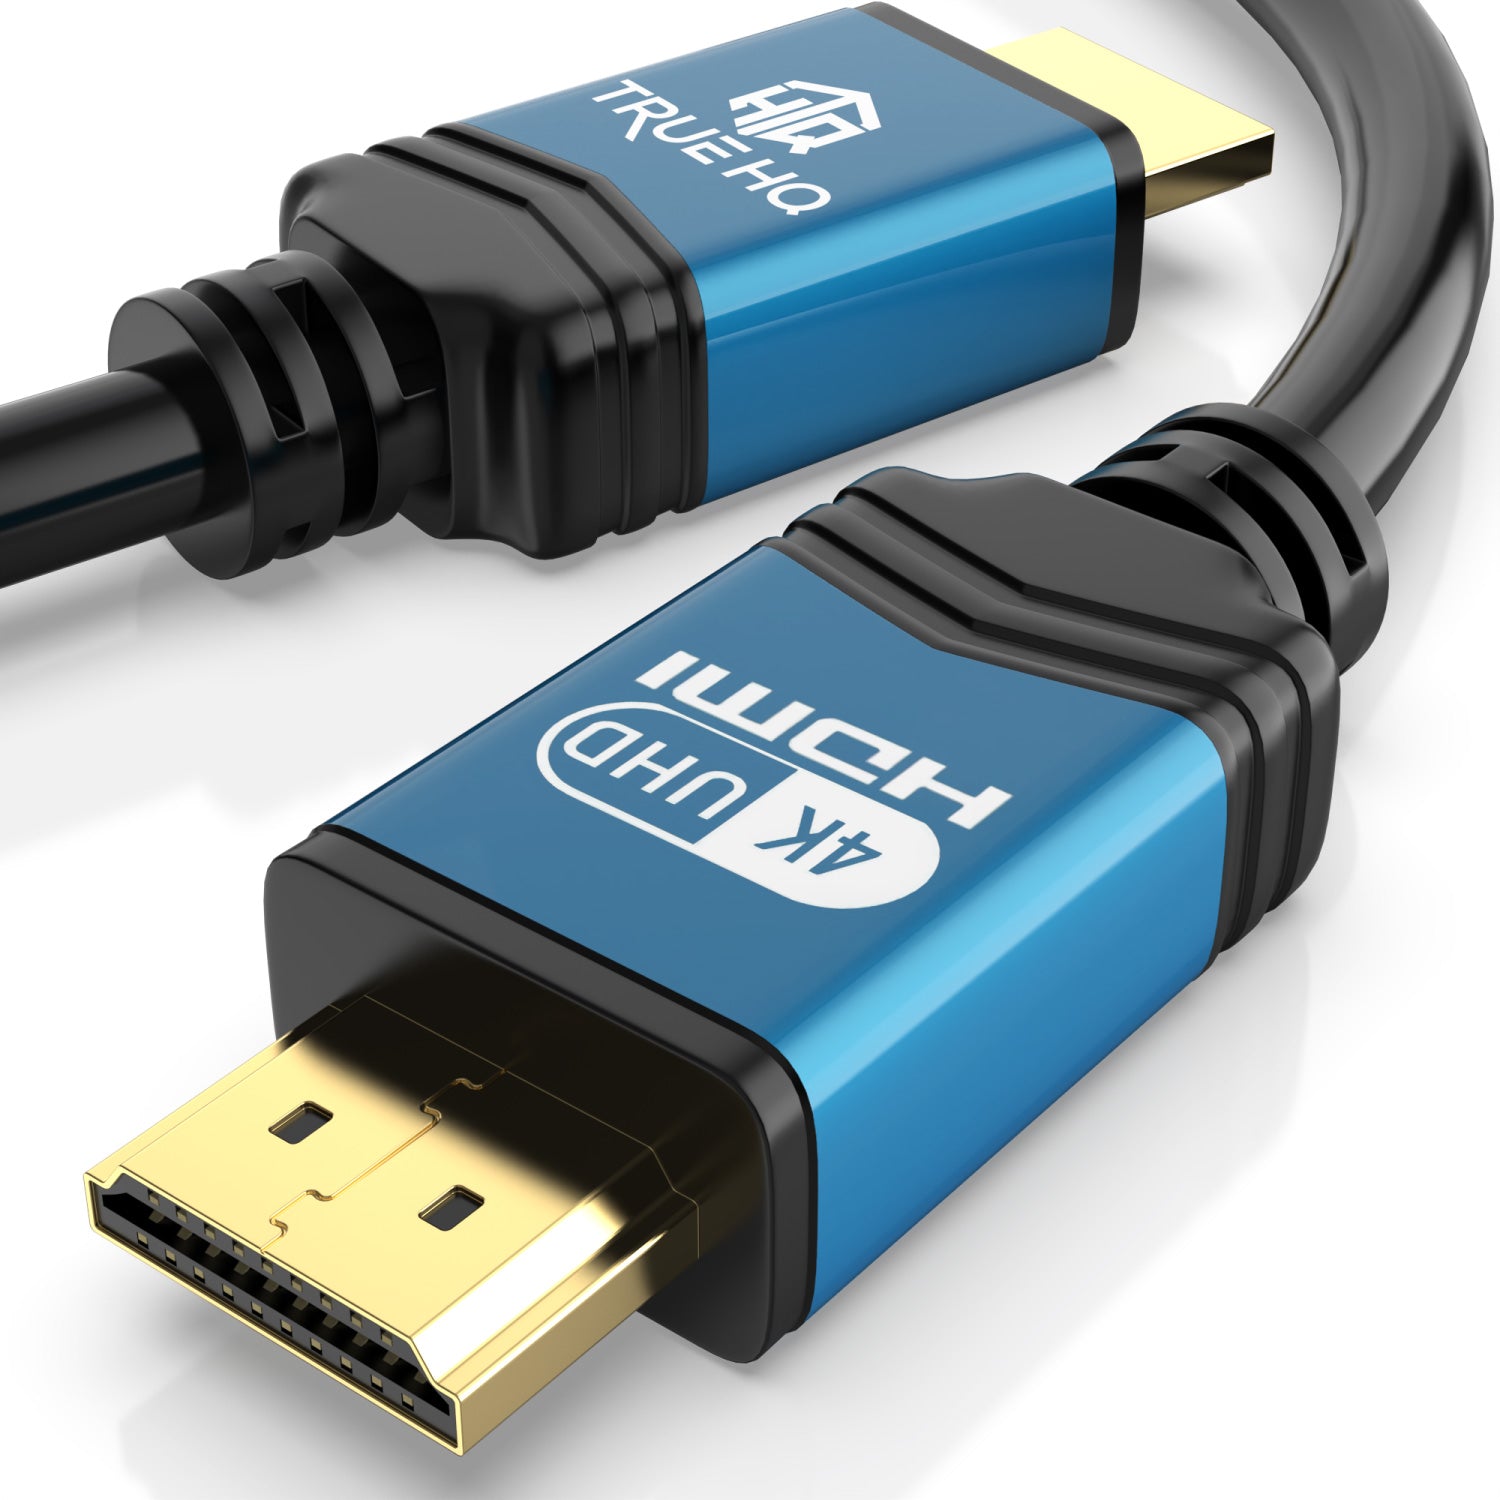 4K HDMI CABLE 5M HDMI LEAD BY TRUE HQ, DESIGNED IN THE UK